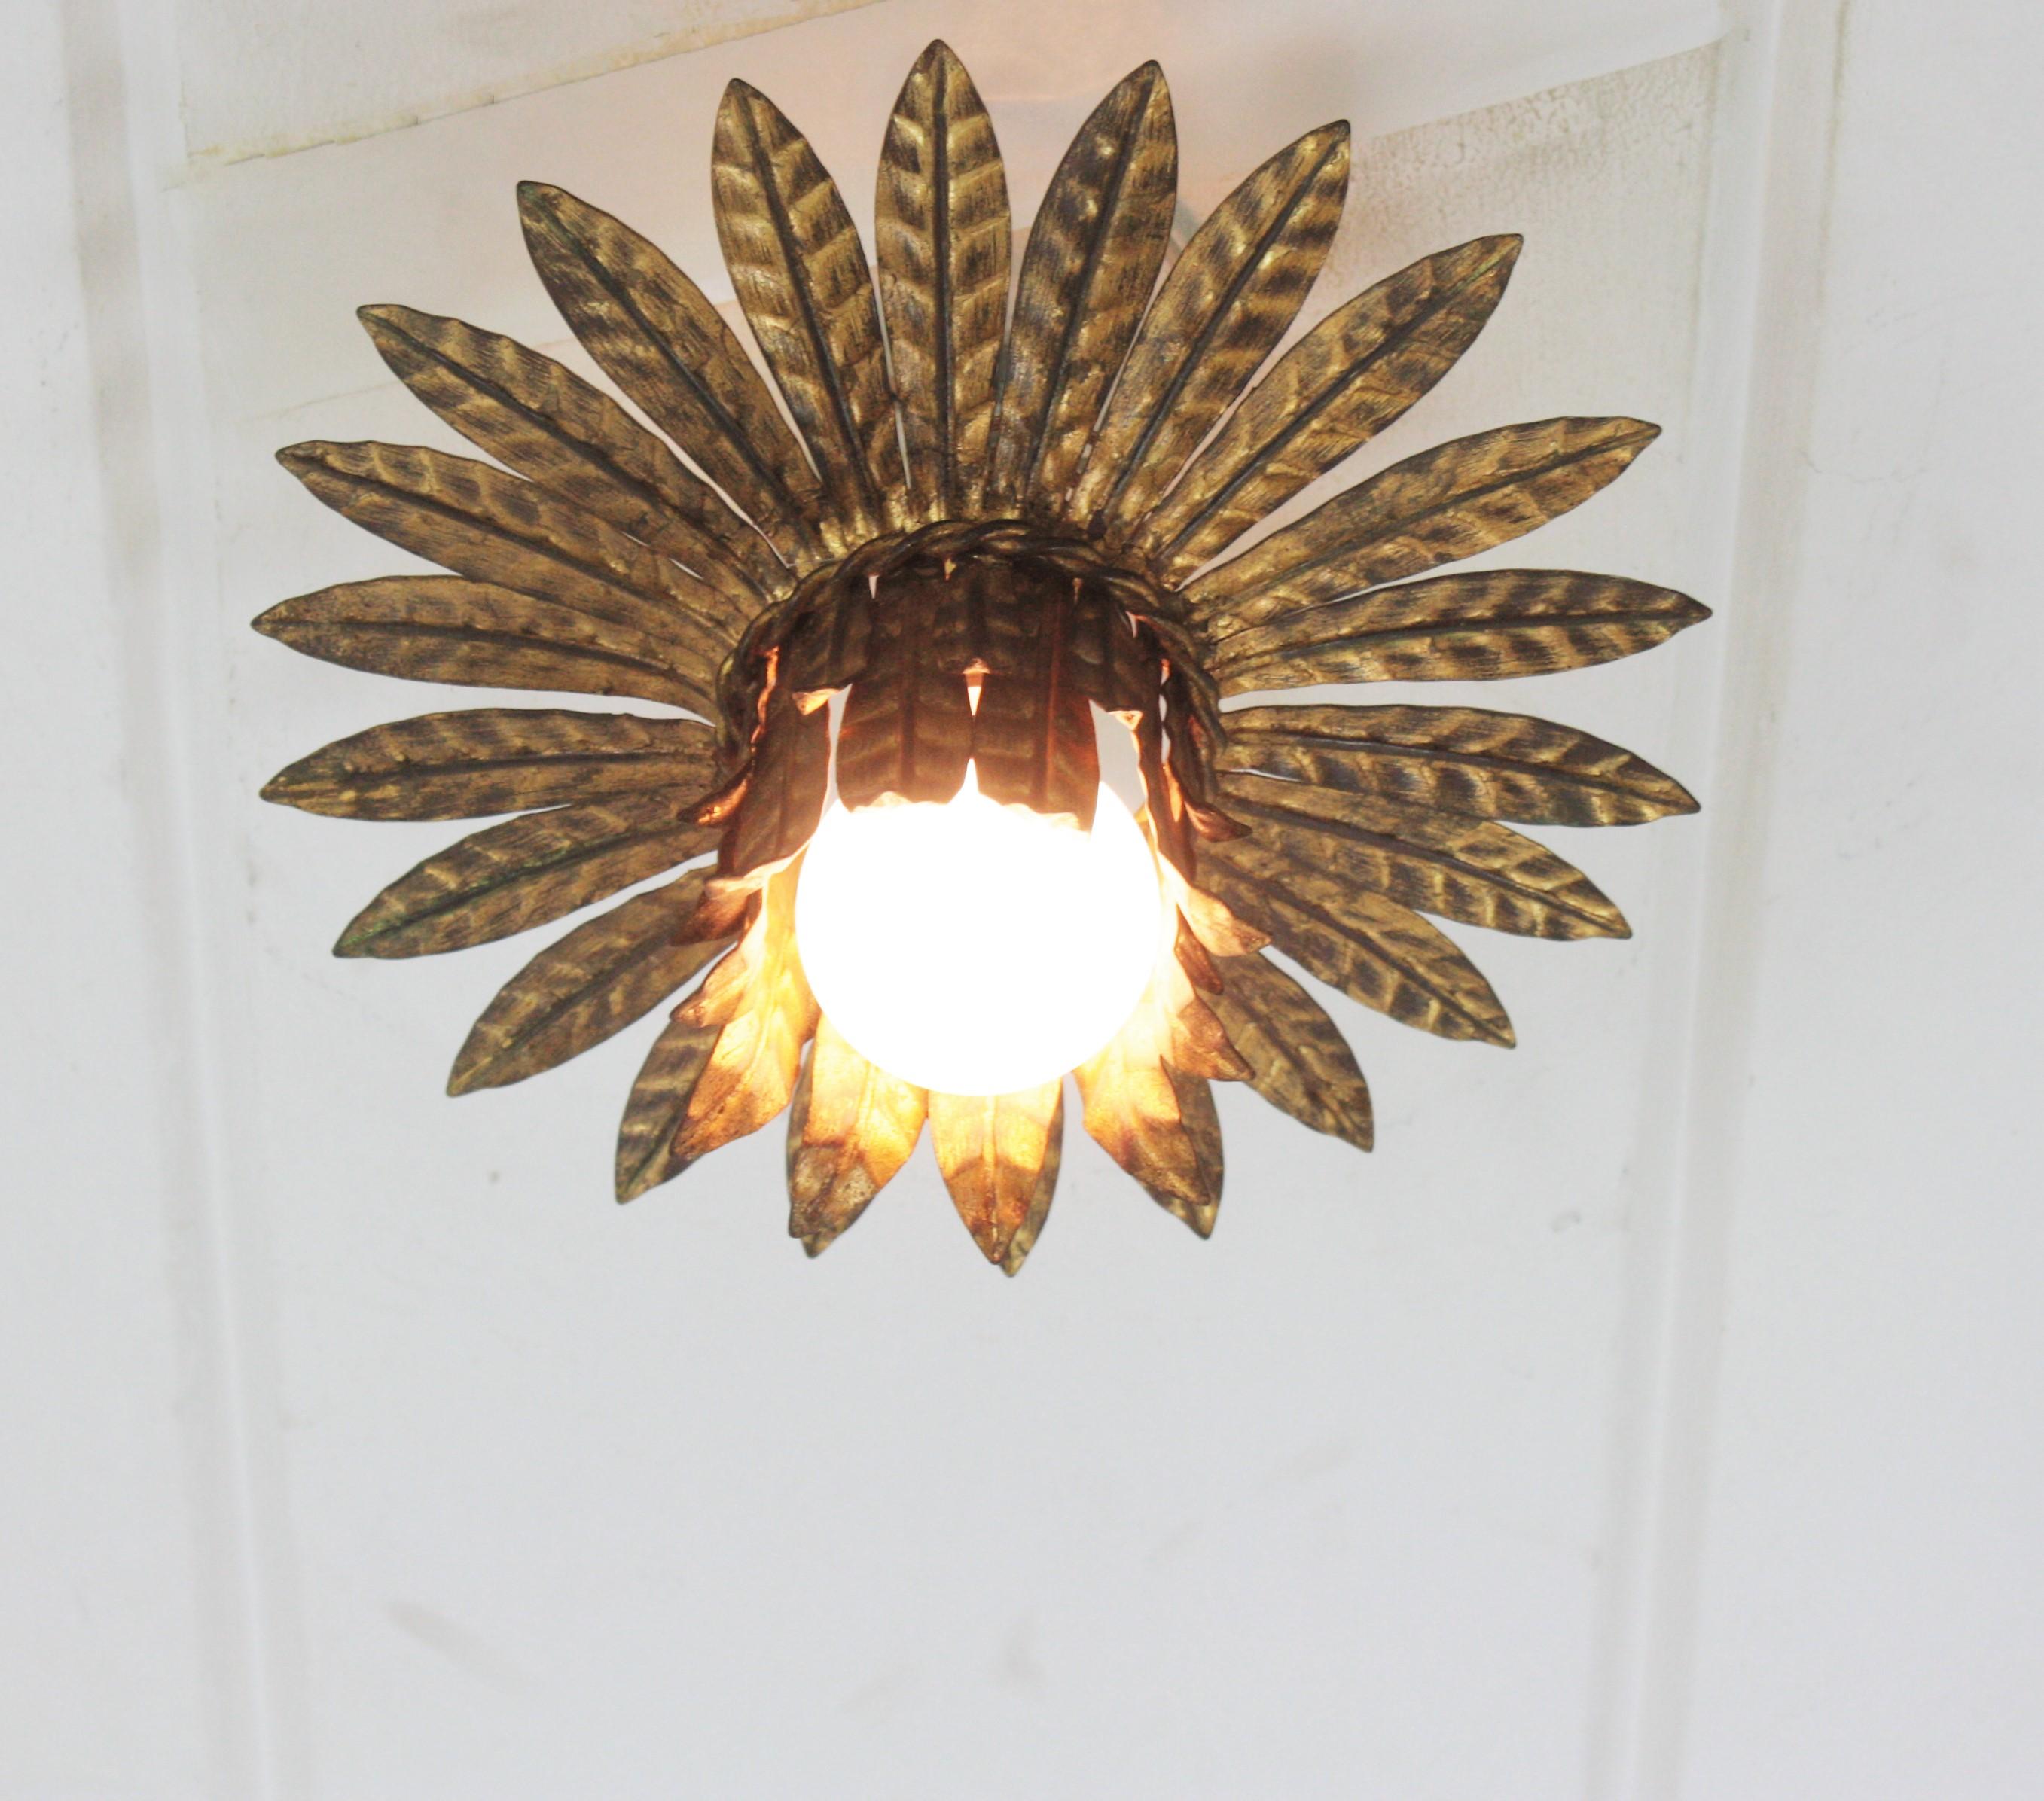 French Leaves Bouquet Crown Ceiling Light Fixture in Gilt Iron, 1940s For Sale 7